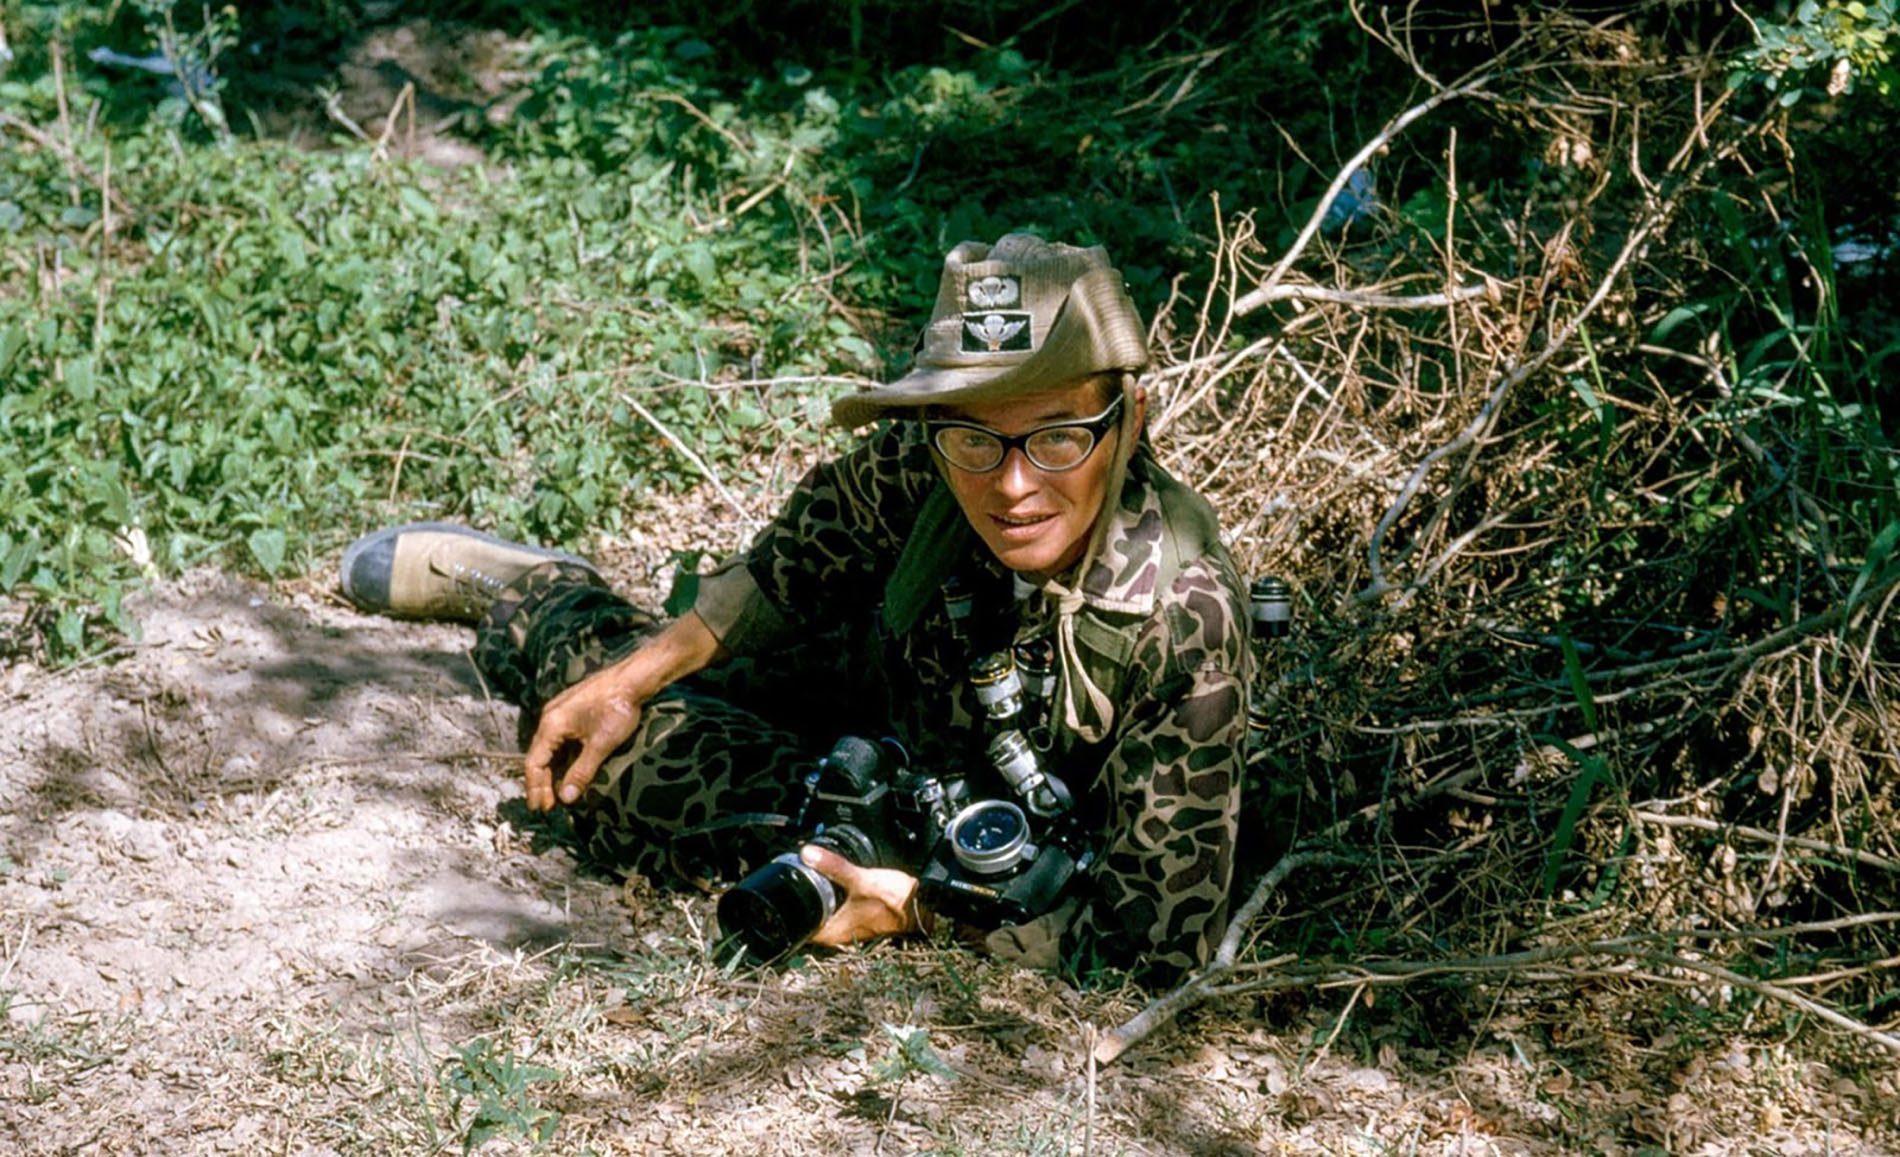 Dickey Chapelle photographed in Vietnam while reporting for National Geographic magazine. (Wisconsin Historical Society )